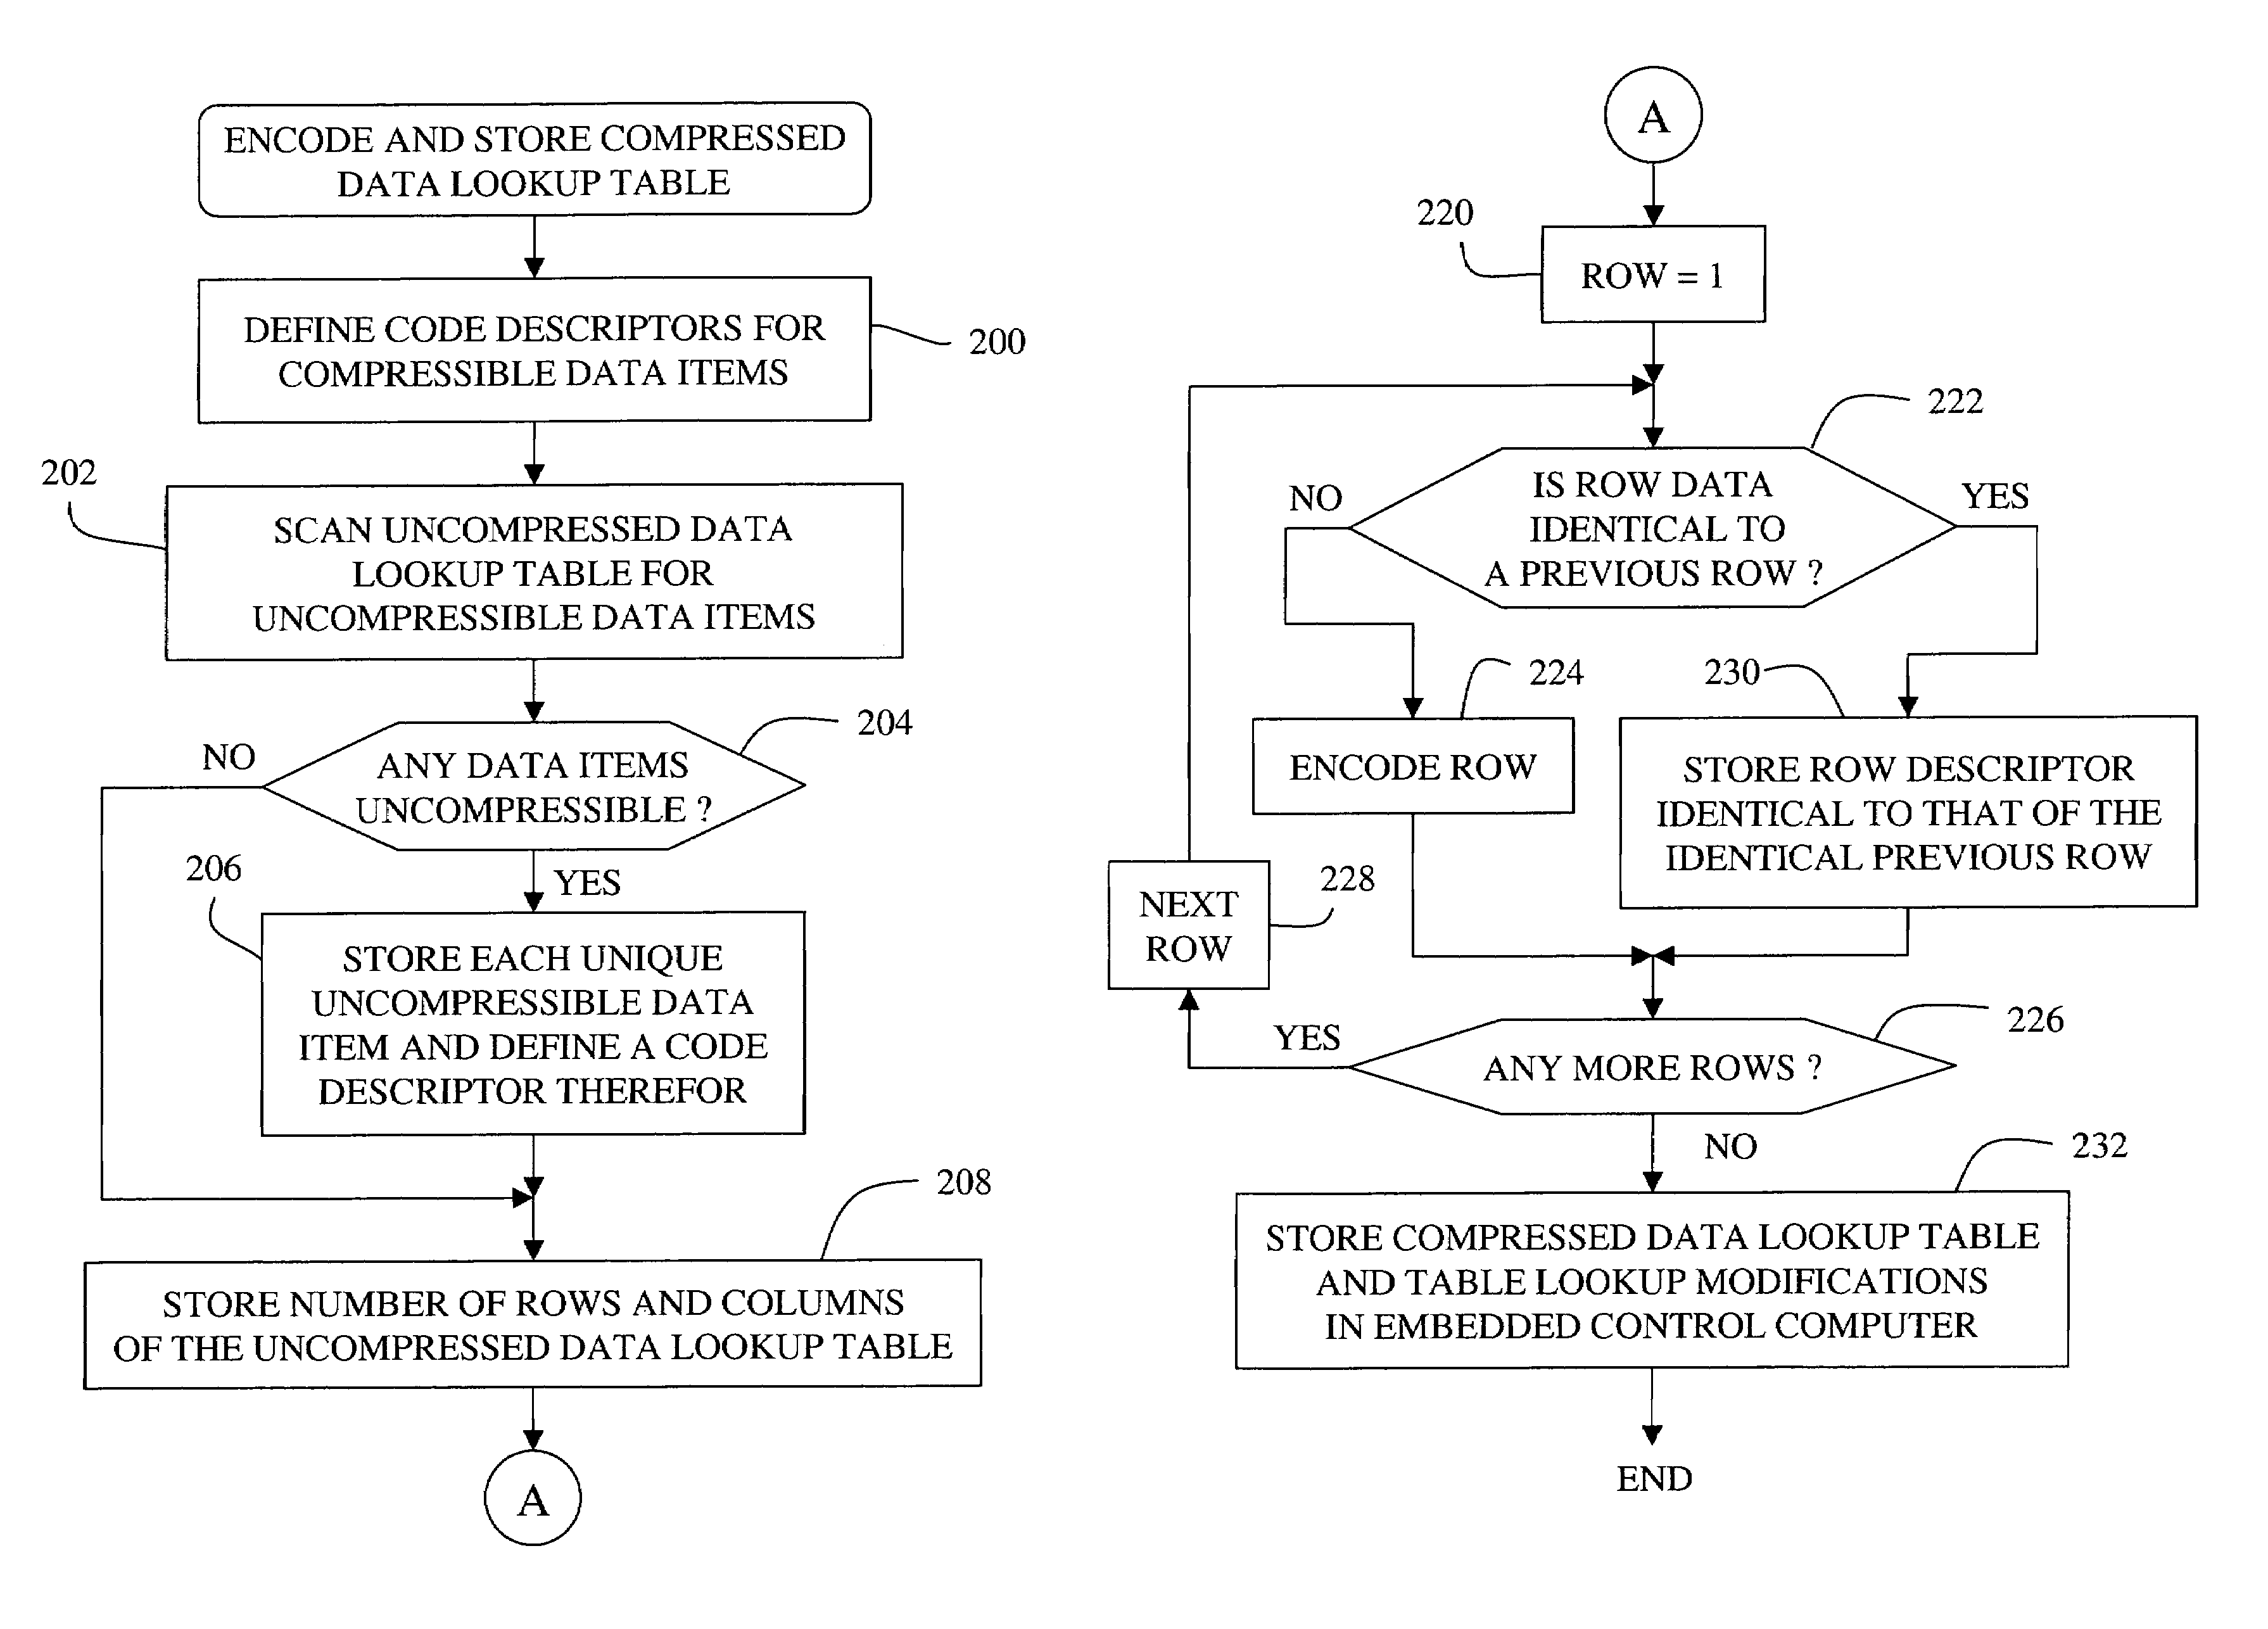 Method of encoding and storing in a machine control computer a compressed data lookup table